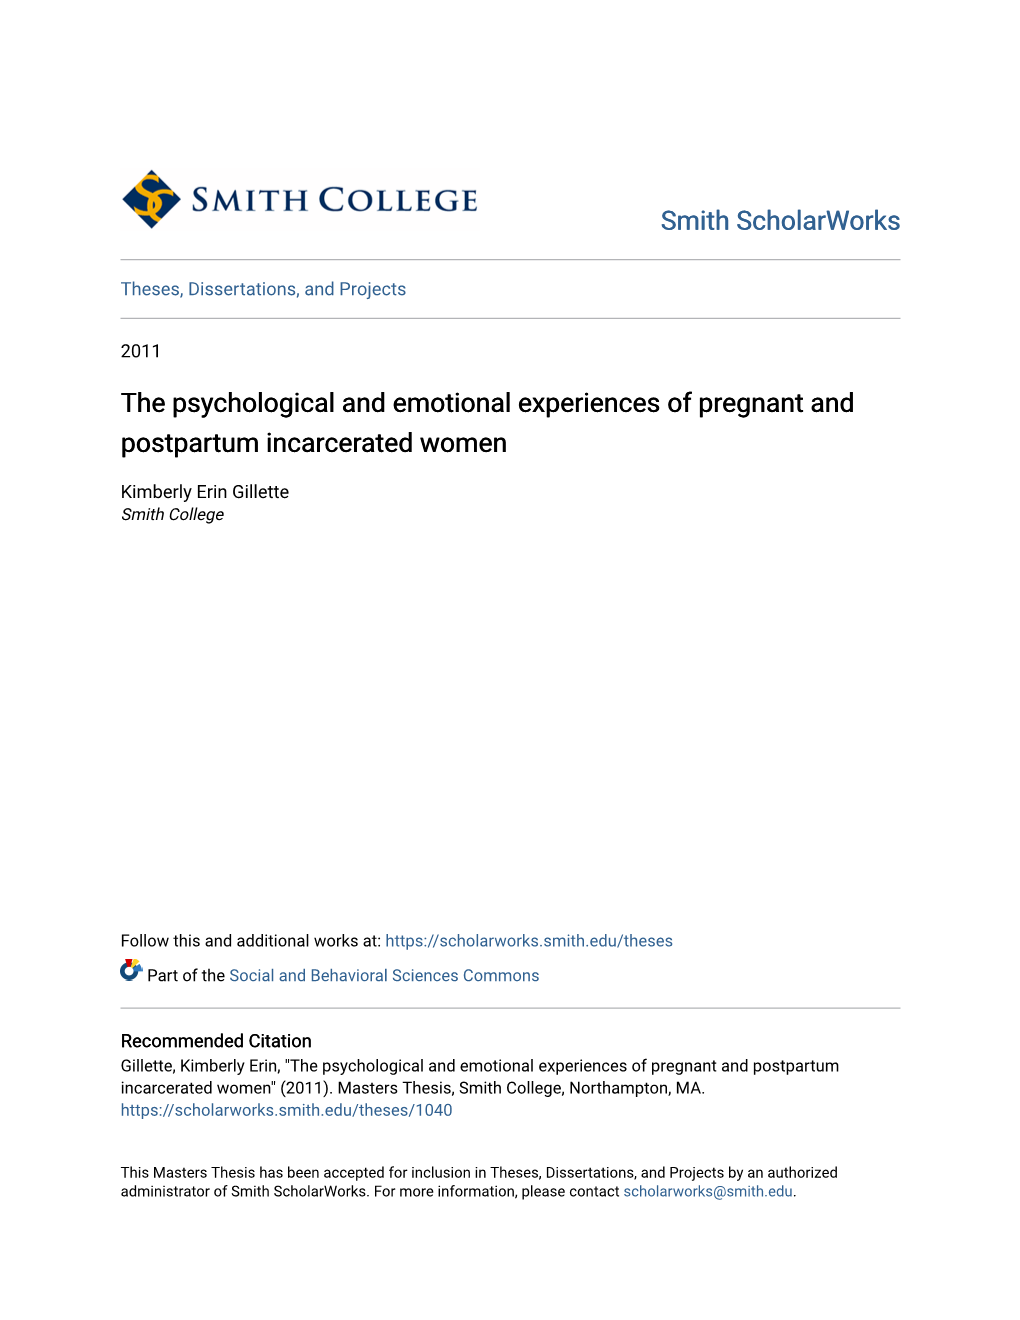 The Psychological and Emotional Experiences of Pregnant and Postpartum Incarcerated Women